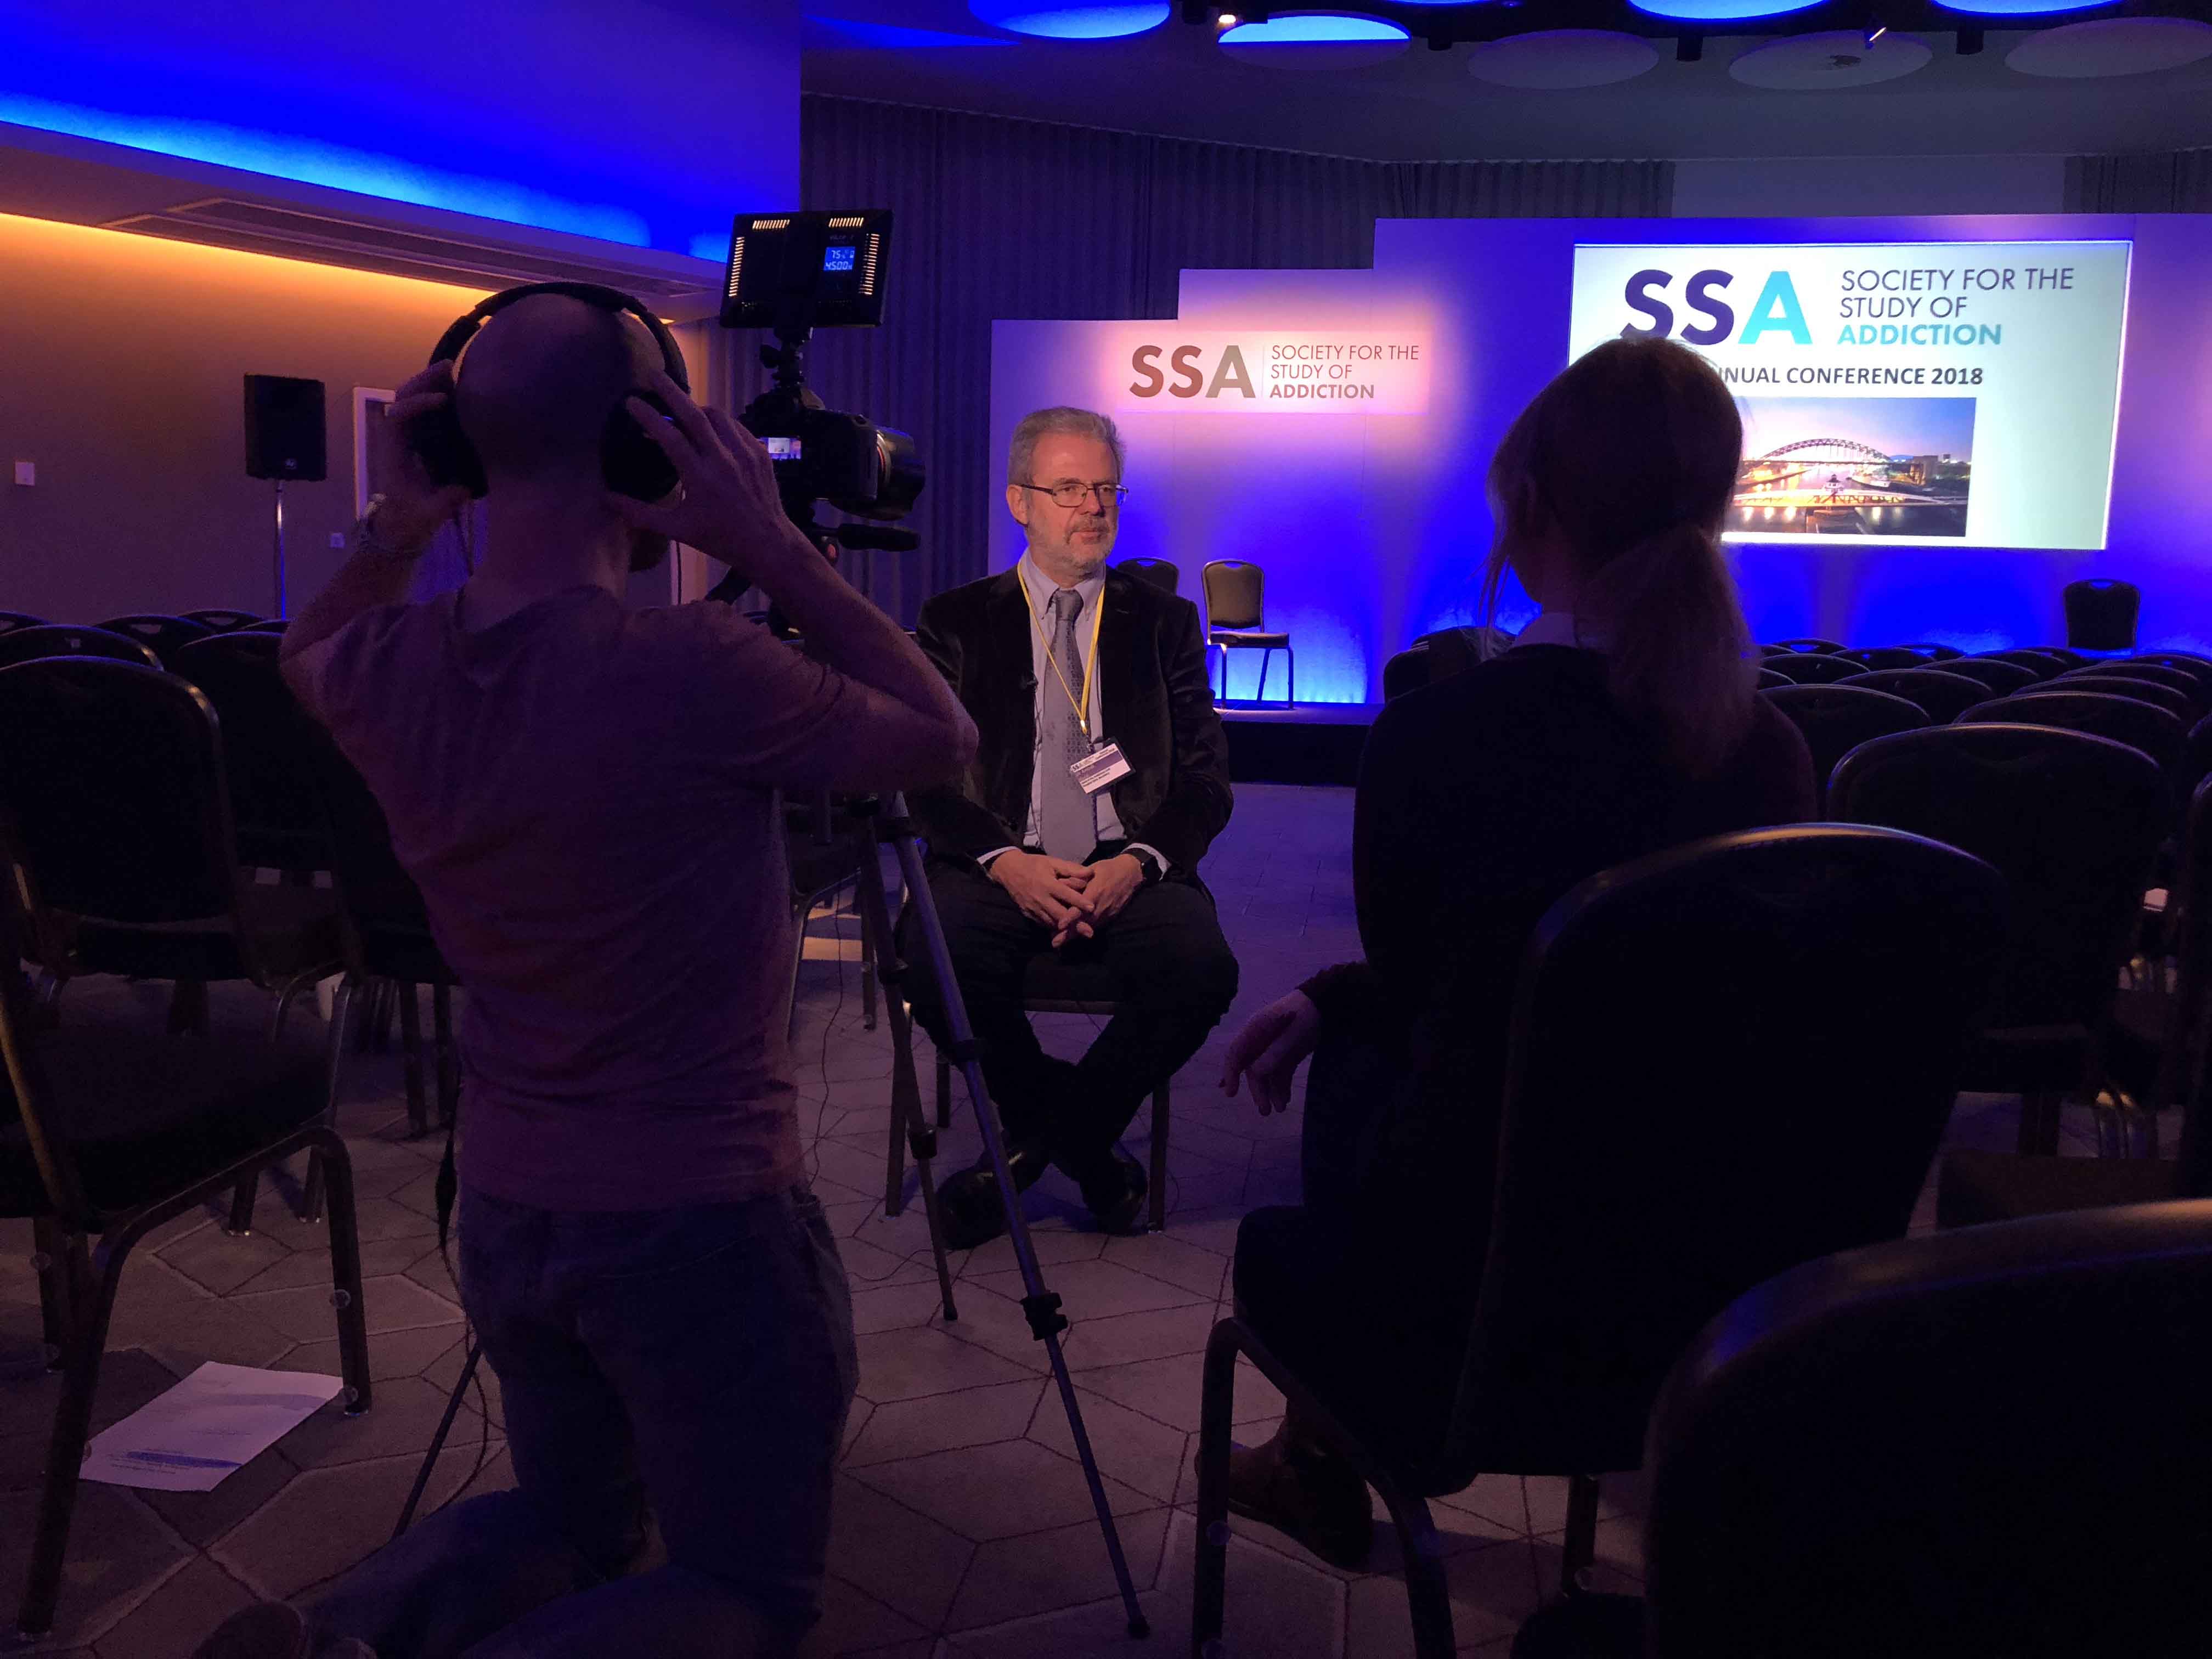 Filming in the auditorium at the SSA Annual Conference